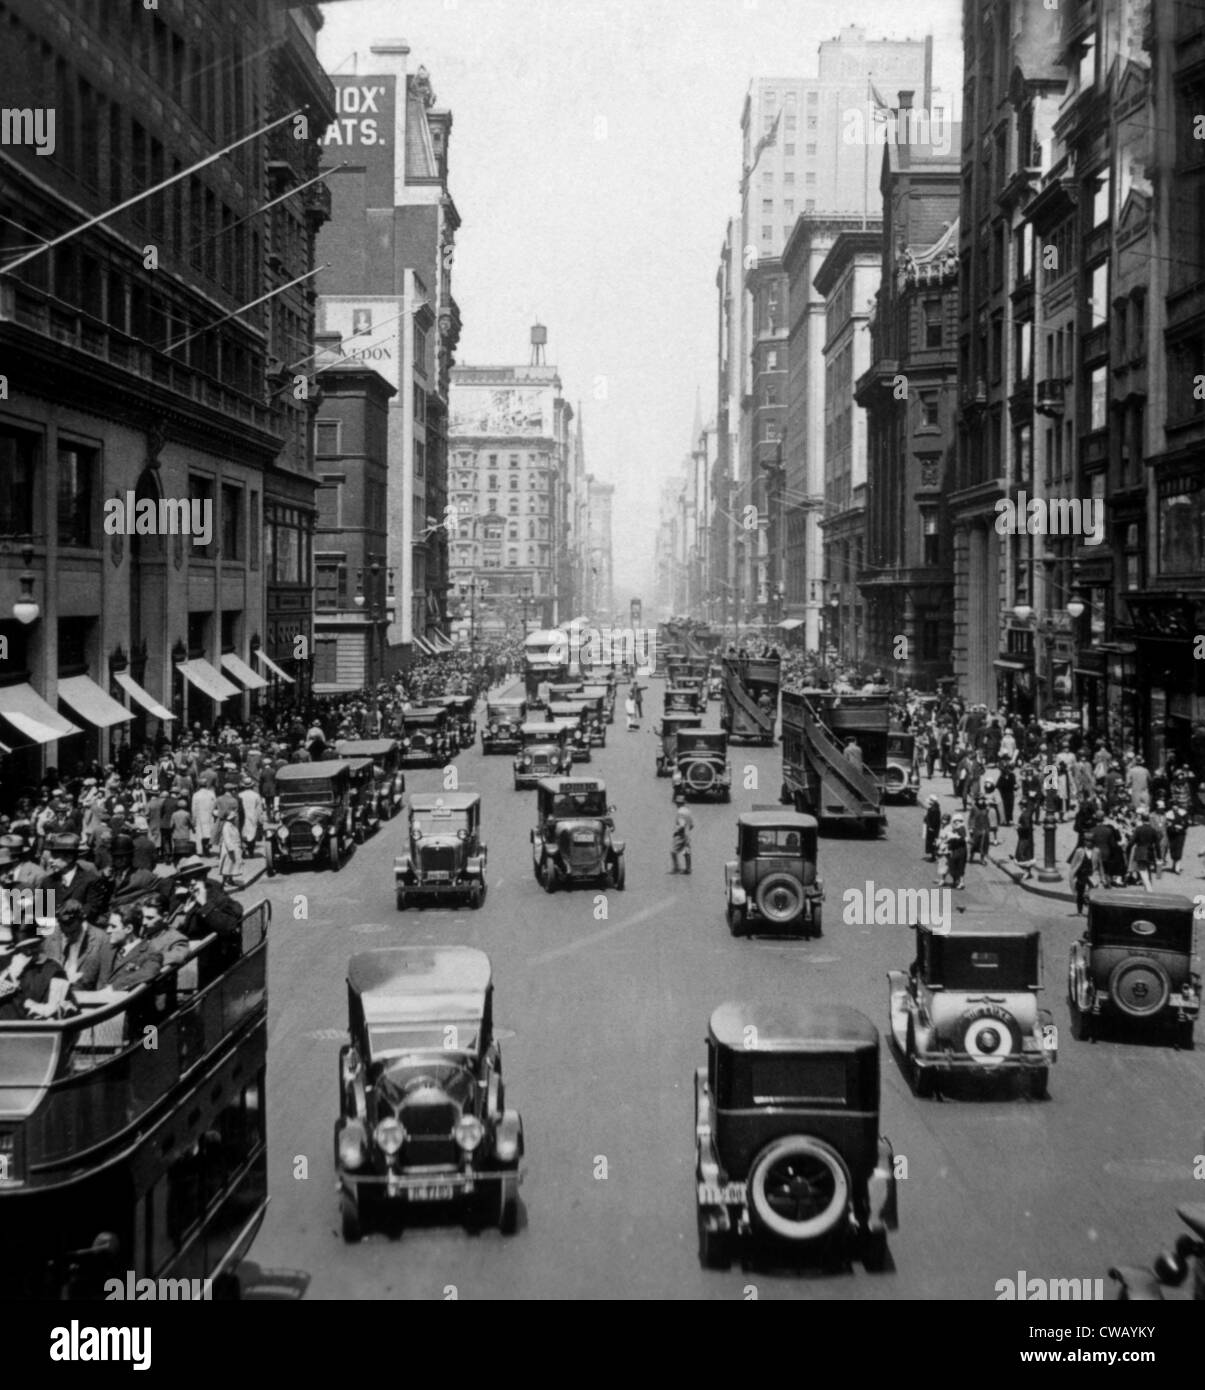 New York City, Fifth Avenue, North from 38th Street, c. 1912. Stock Photo